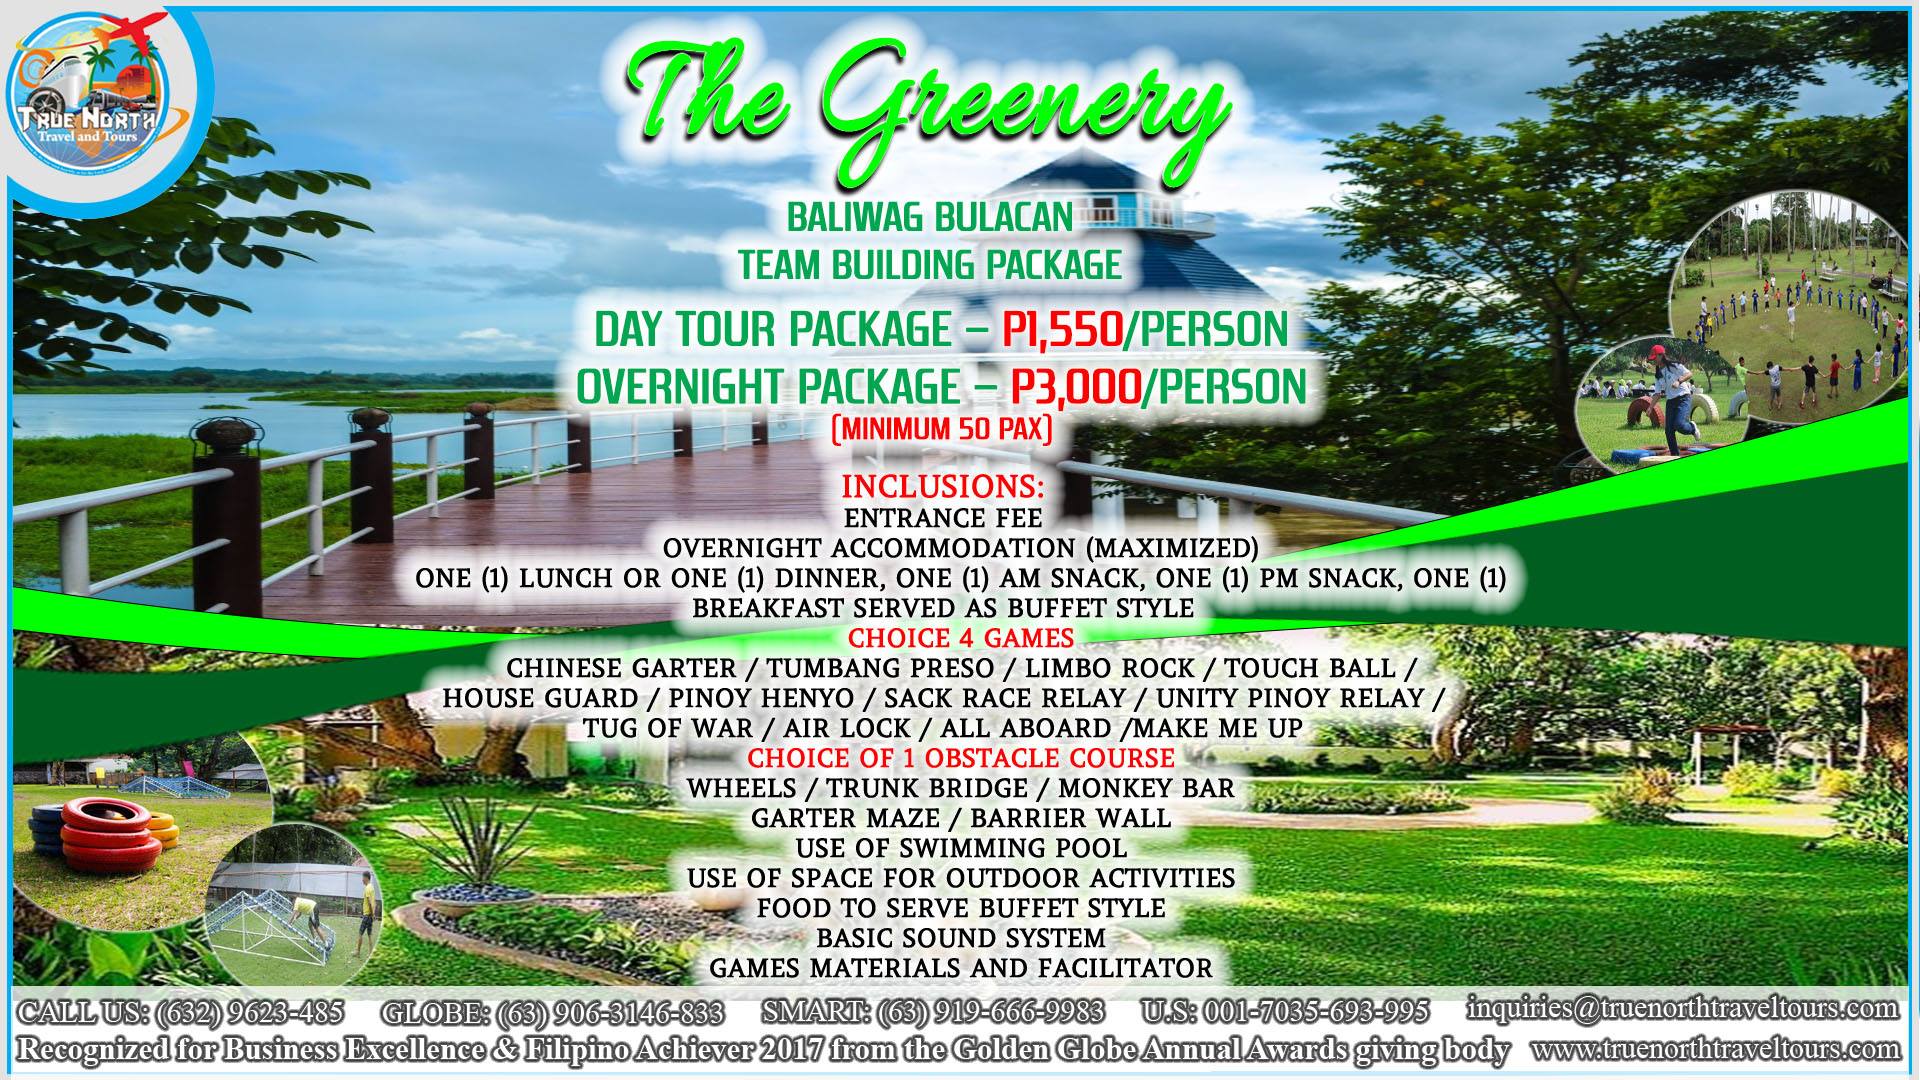 The Greenery - TRUE NORTH TRAVEL AND TOURS